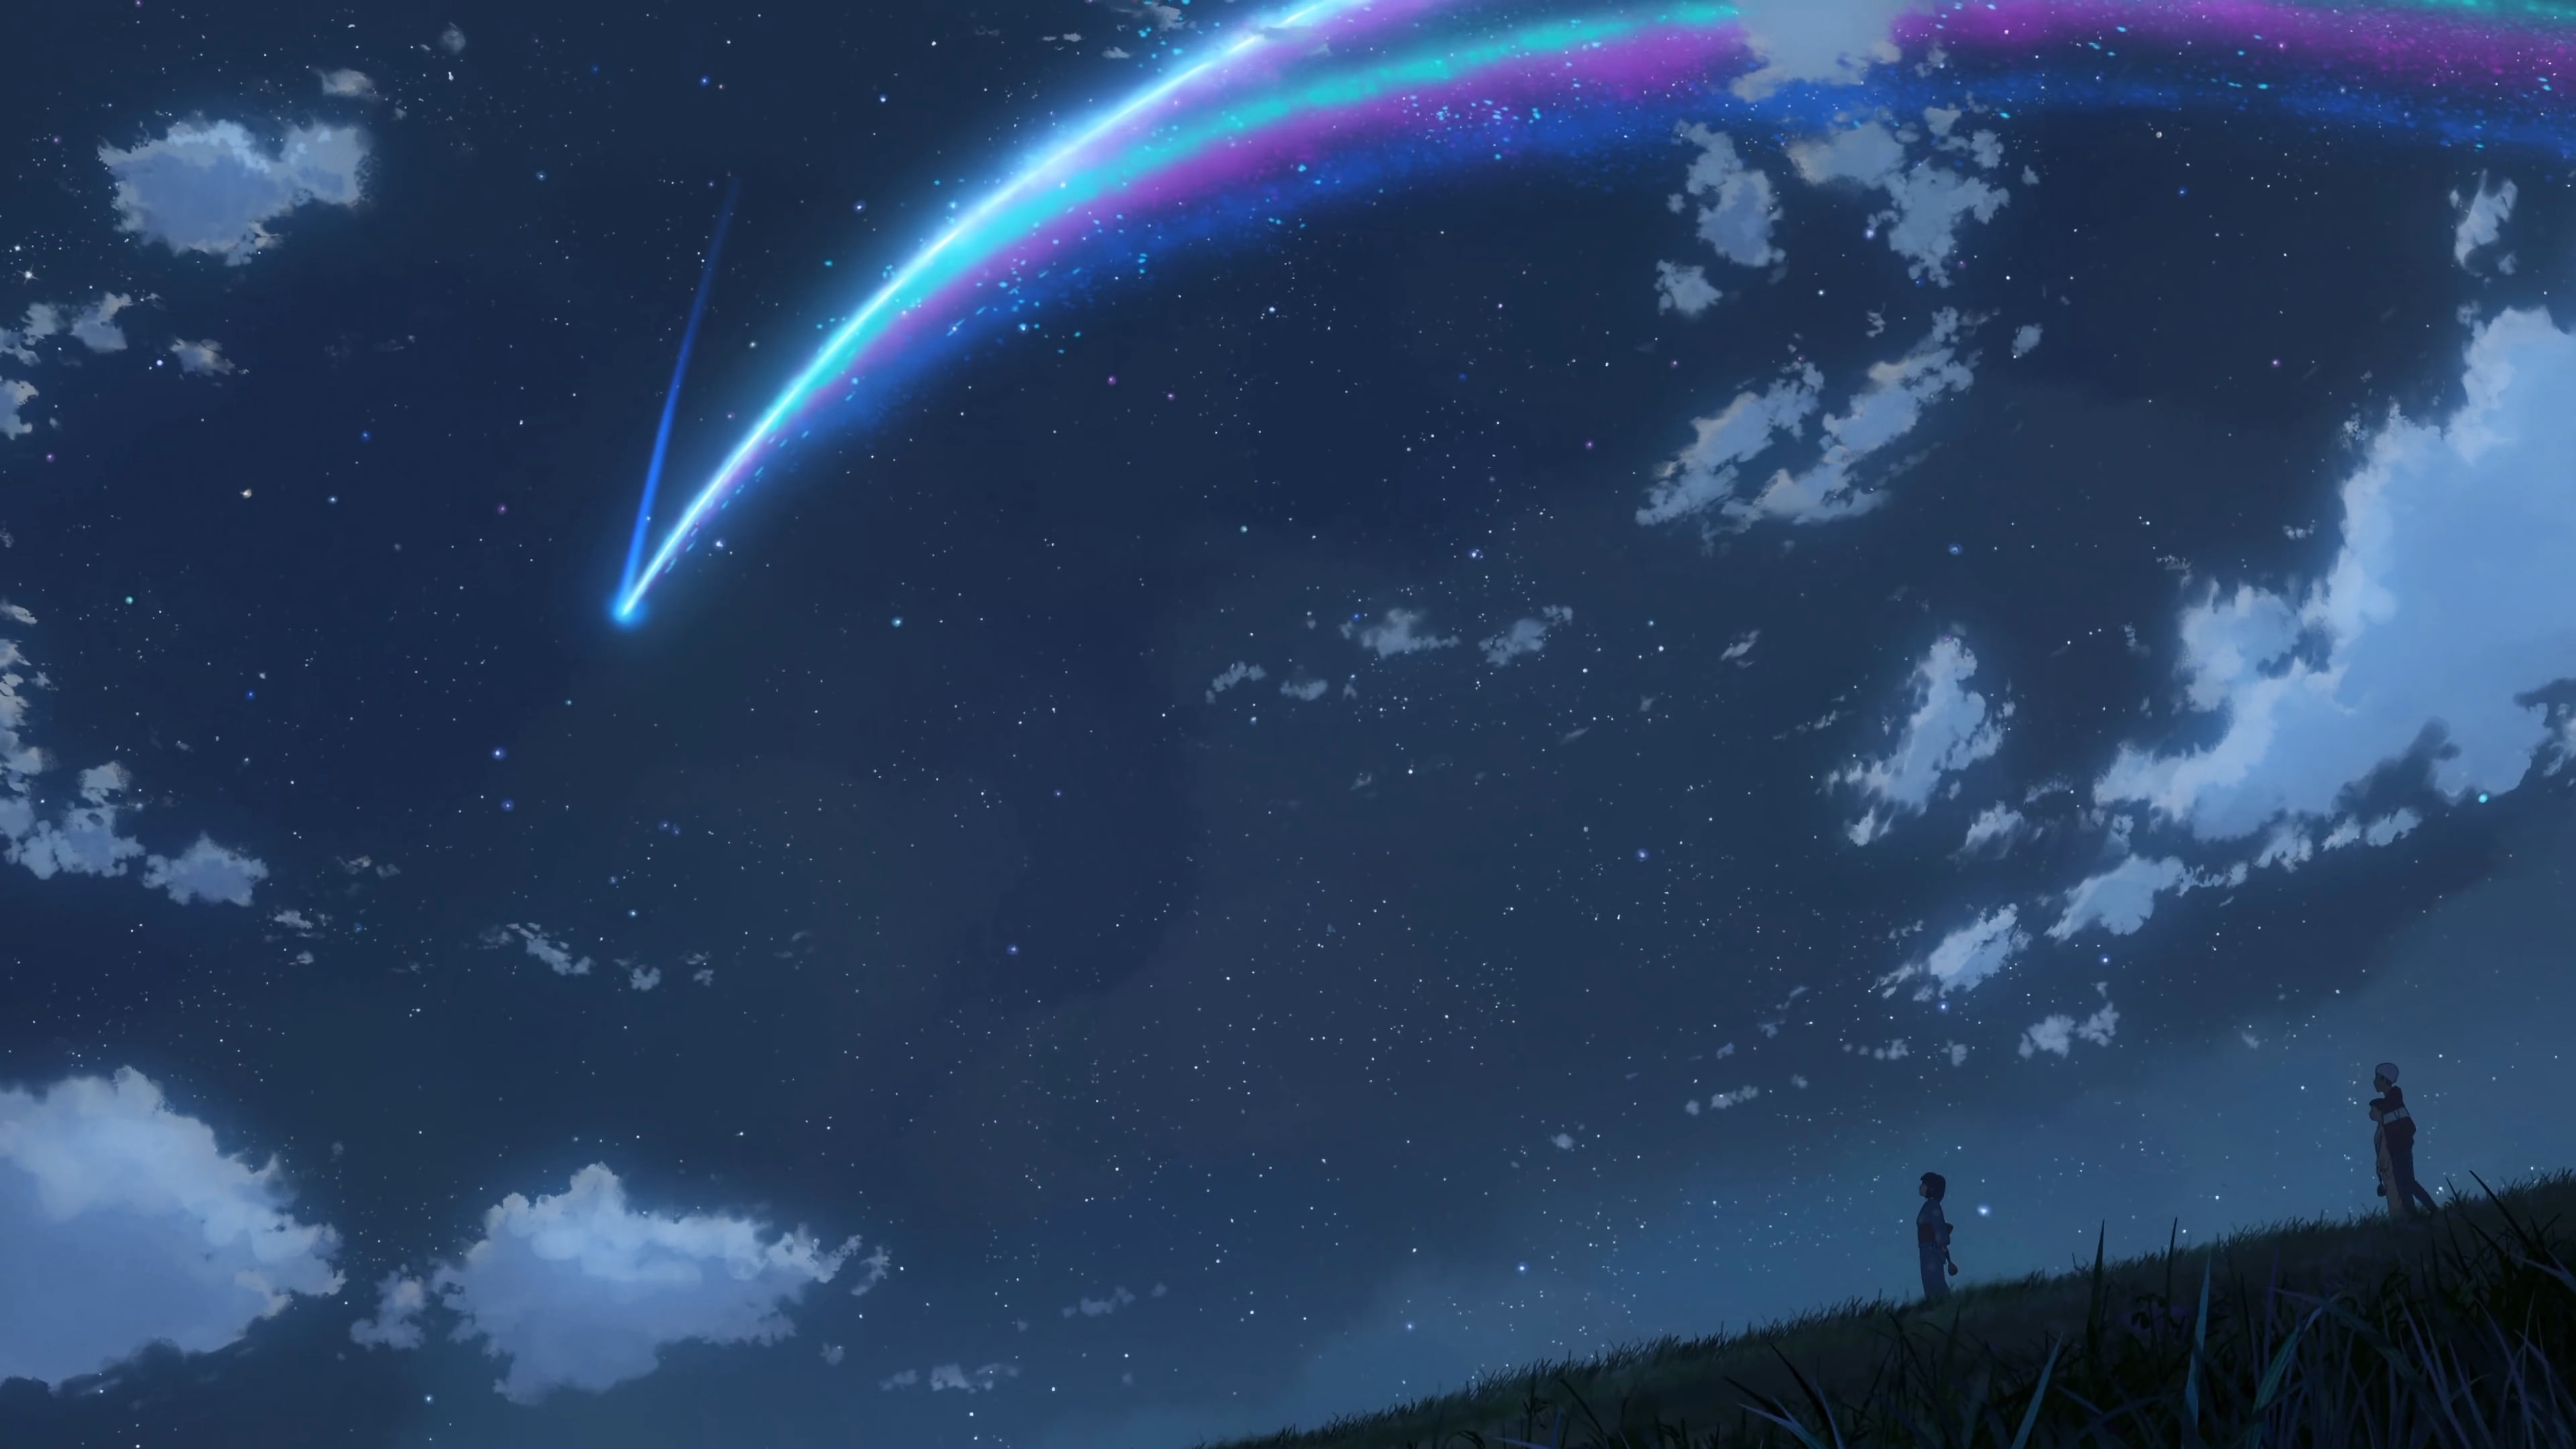 kimi no na wa wallpaper,sky,atmosphere,outer space,universe,space